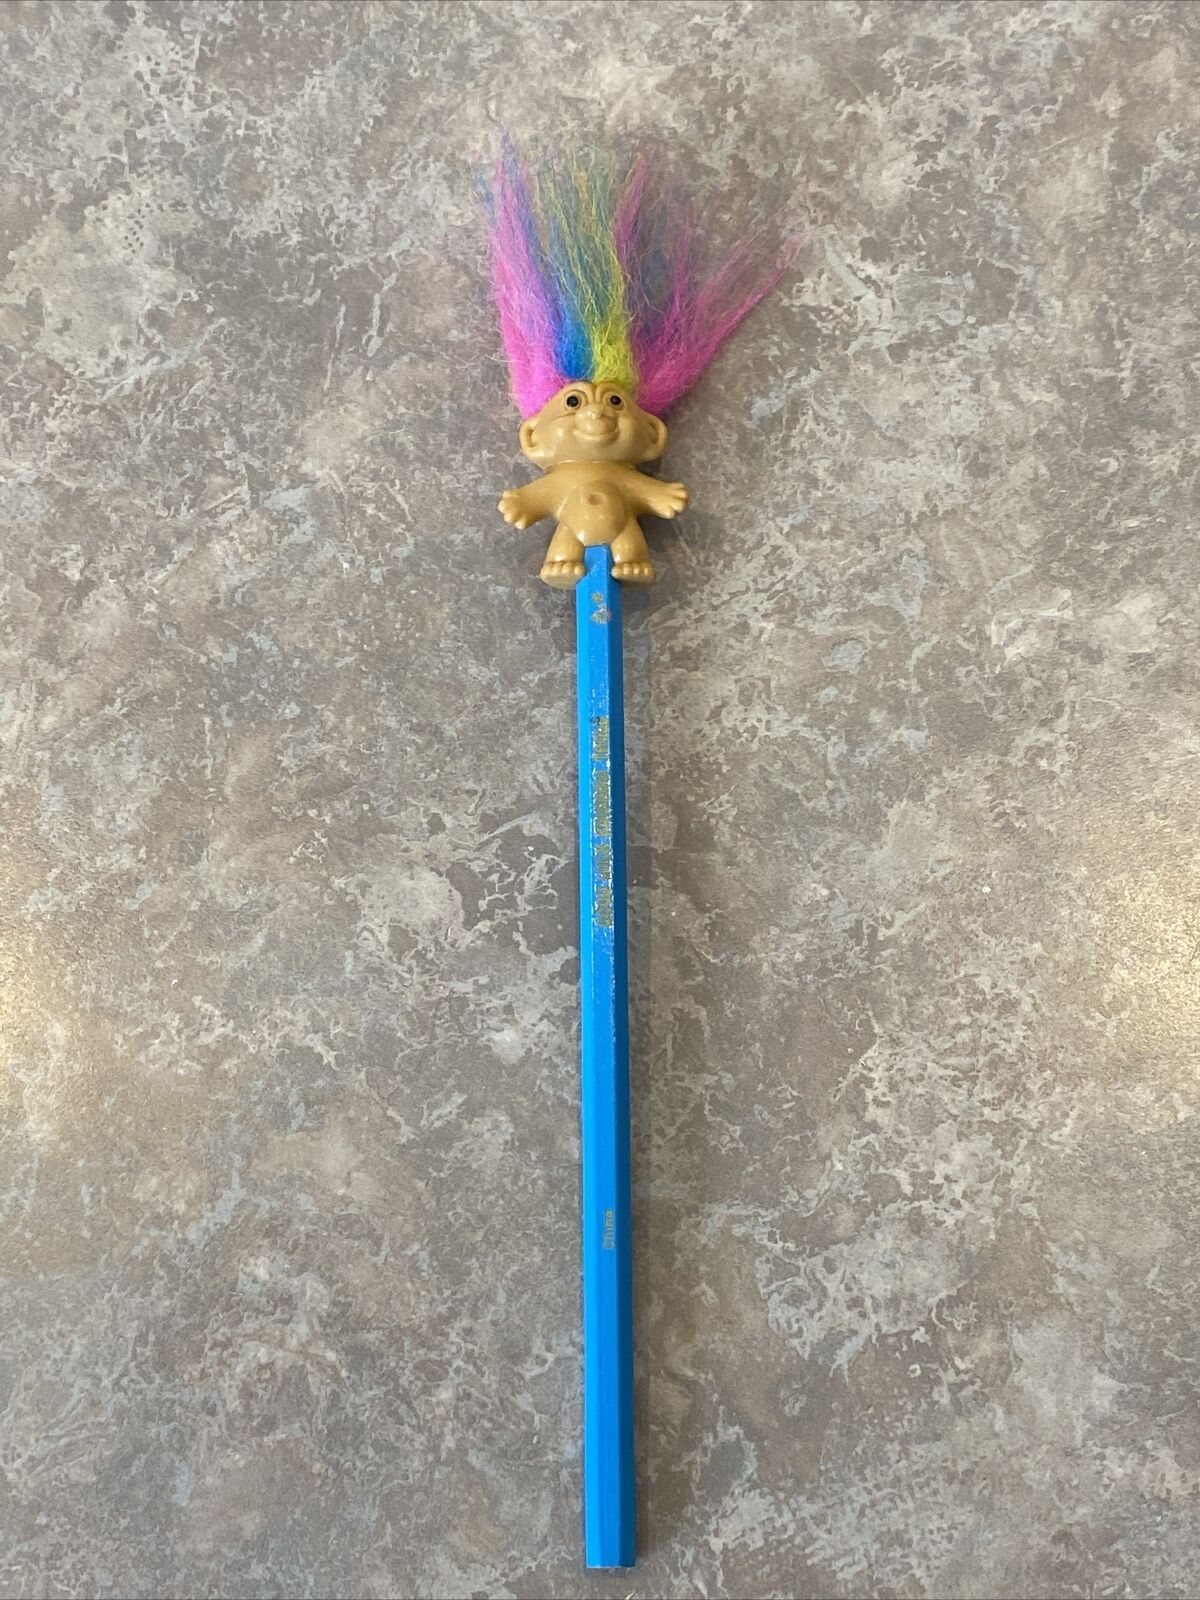 Vintage RUSS Good Luck Rainbow Troll Pencil & Topper Doll - New/not sharpened